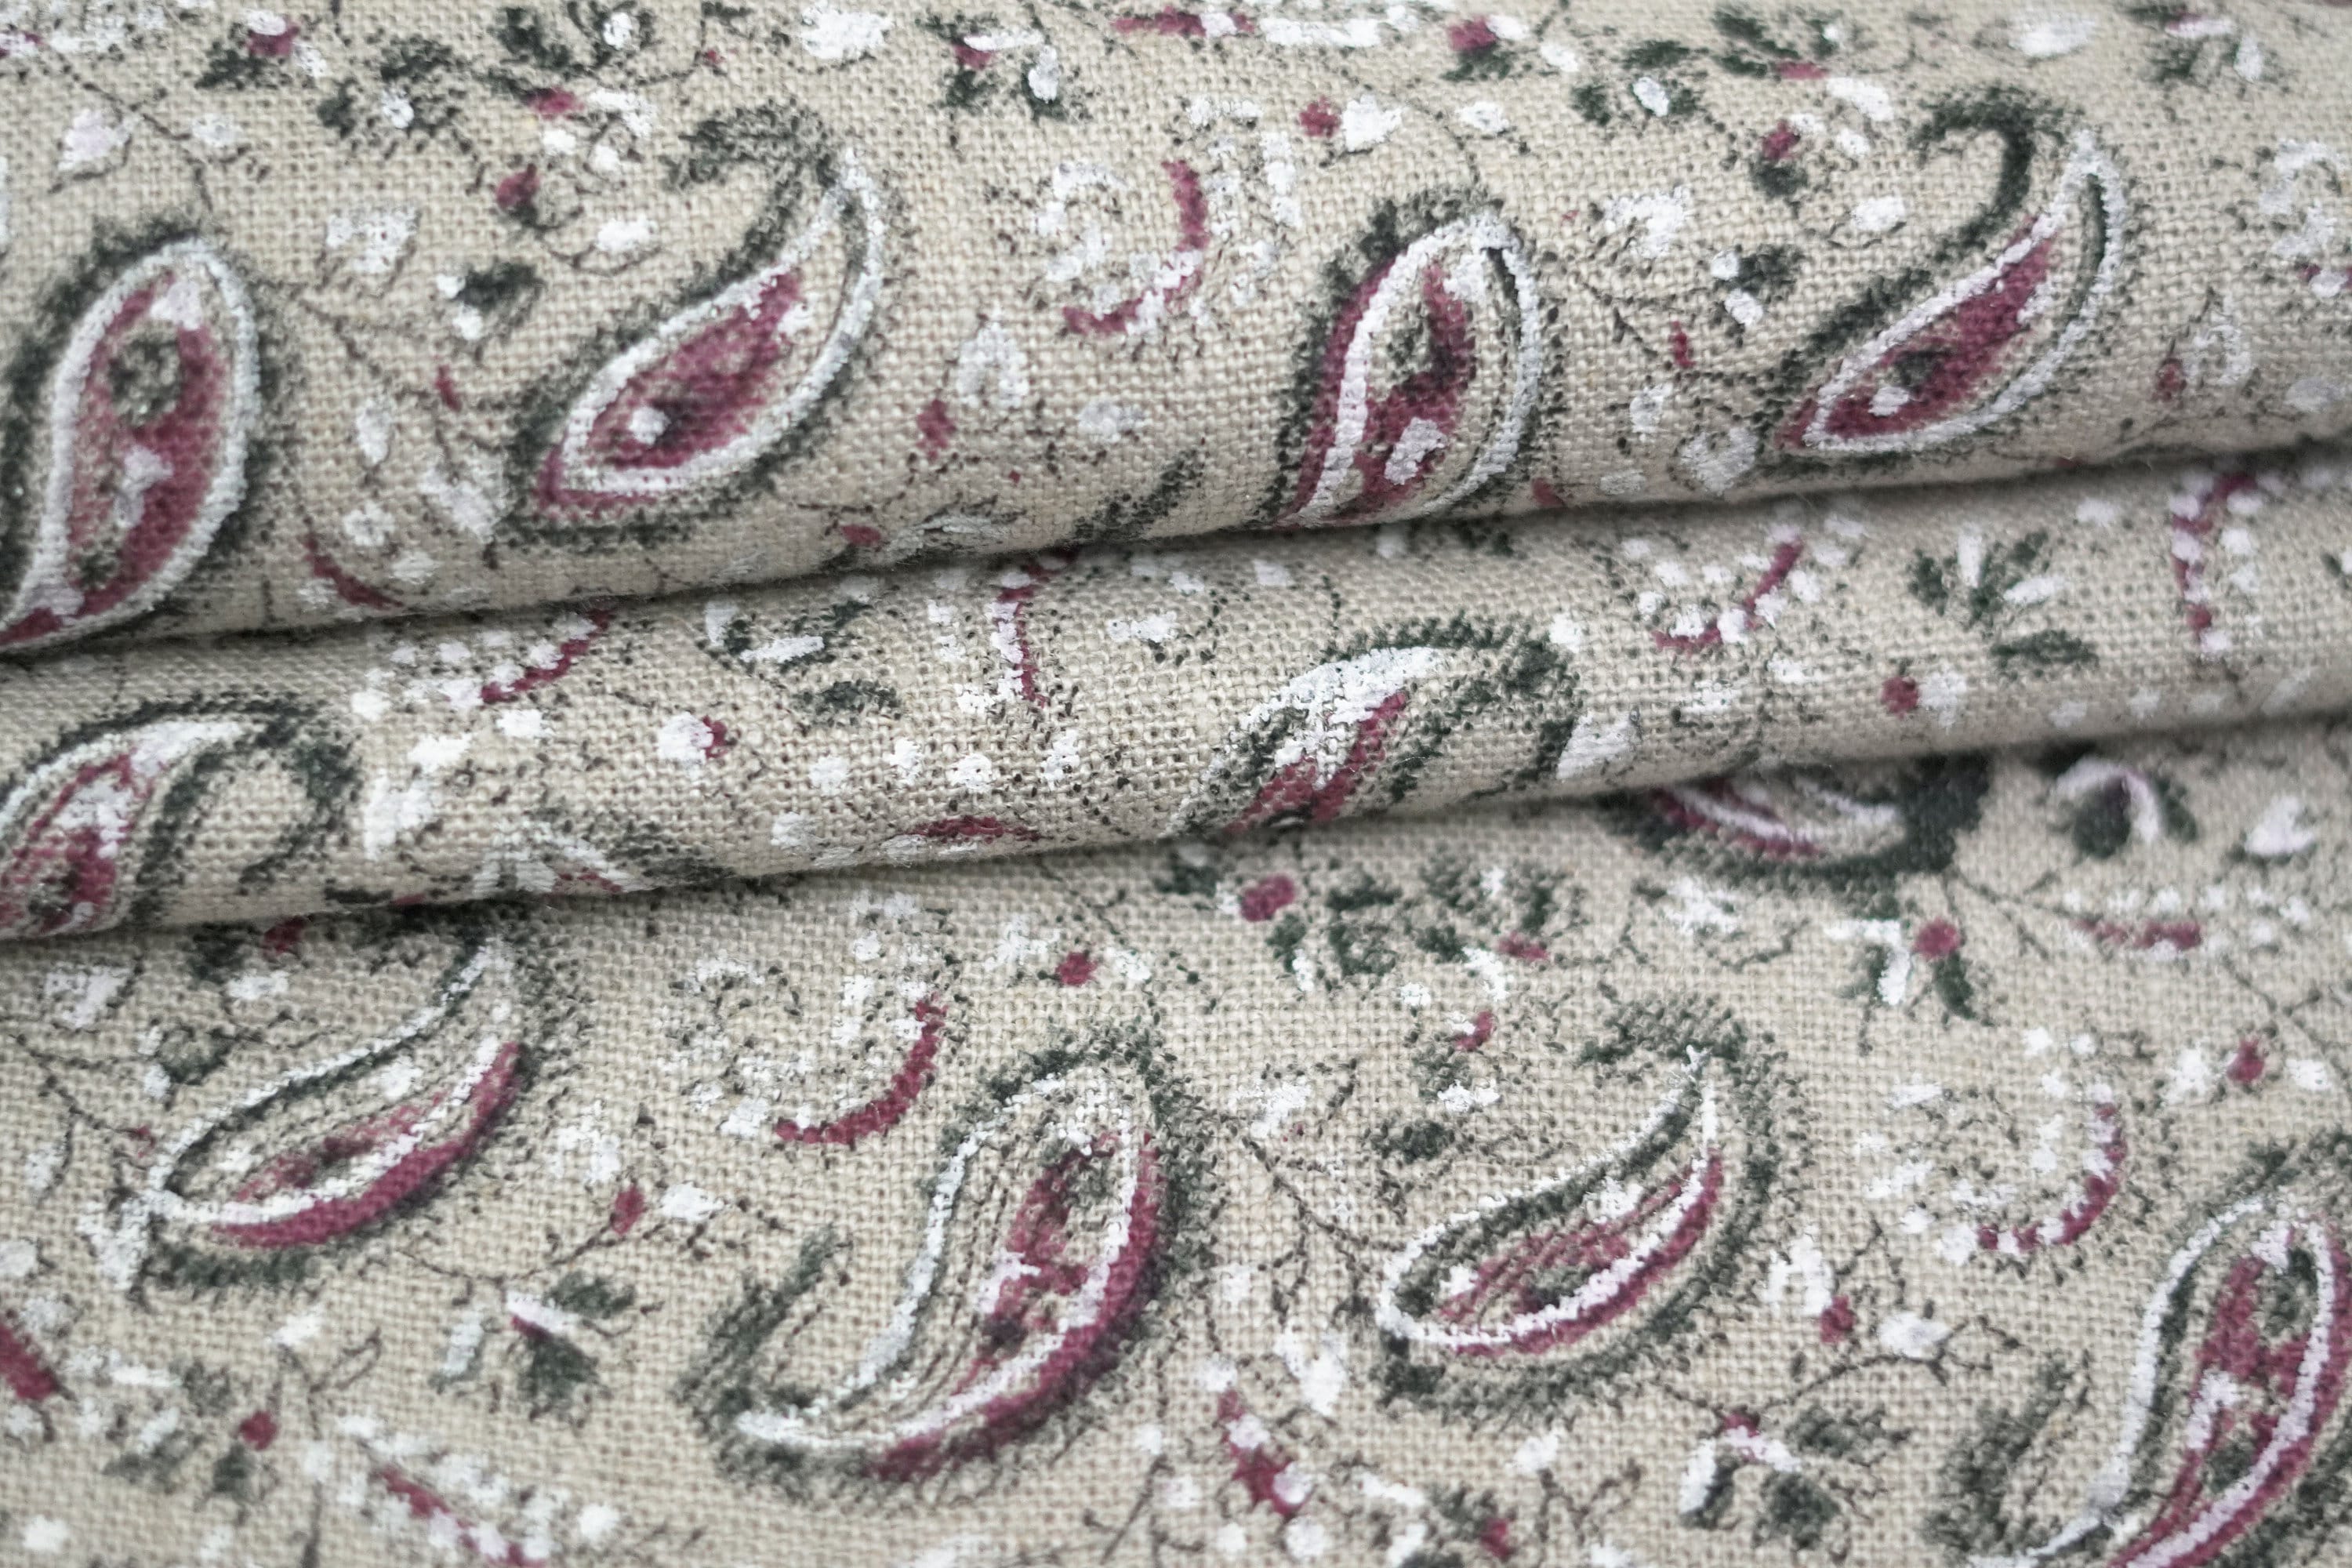 Block Print Linen Fabric, Paislay Print Block Print Linen Fabric, Heavy Hand Block Fabric, Wide 58"Inch Sold By The Yard For Pillow Case, Cushions And Upholstery